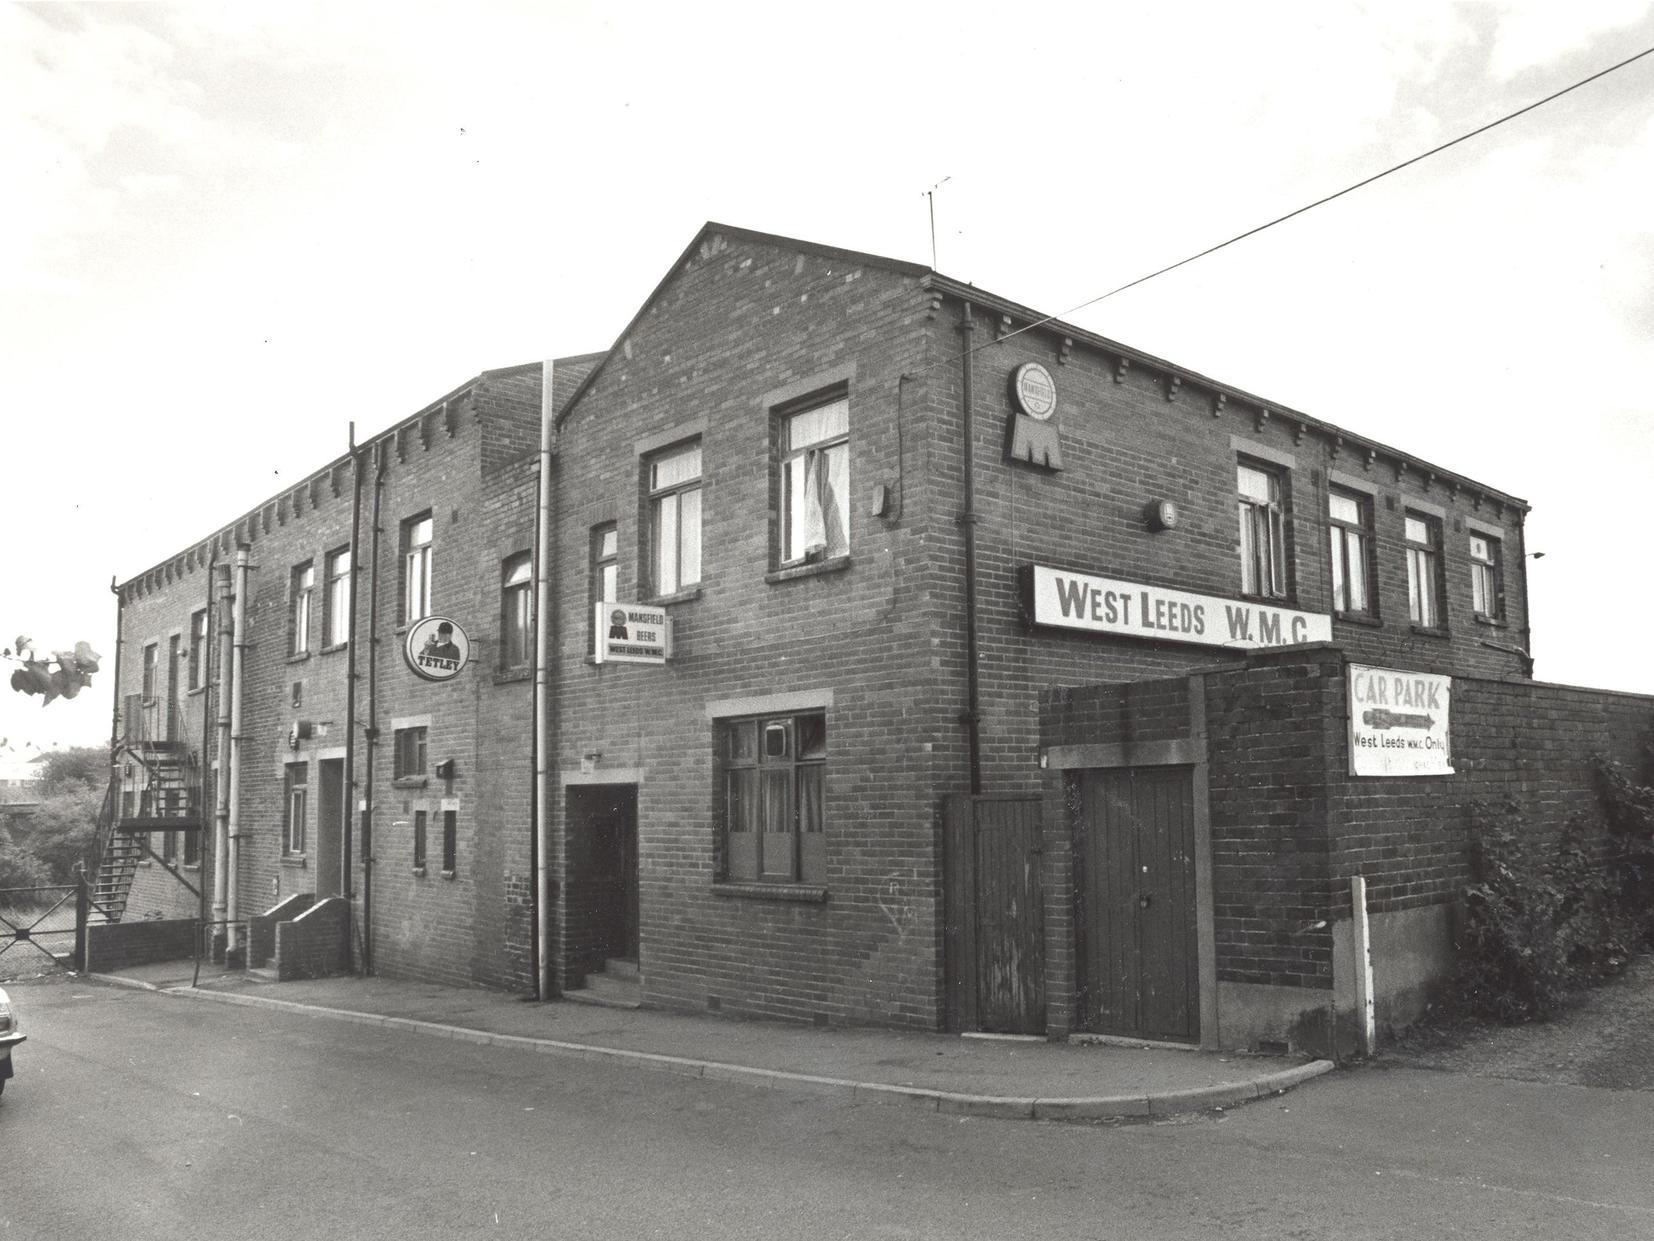 West Leeds Working Men's Club where YTV filmed the Where There's Life documentary.